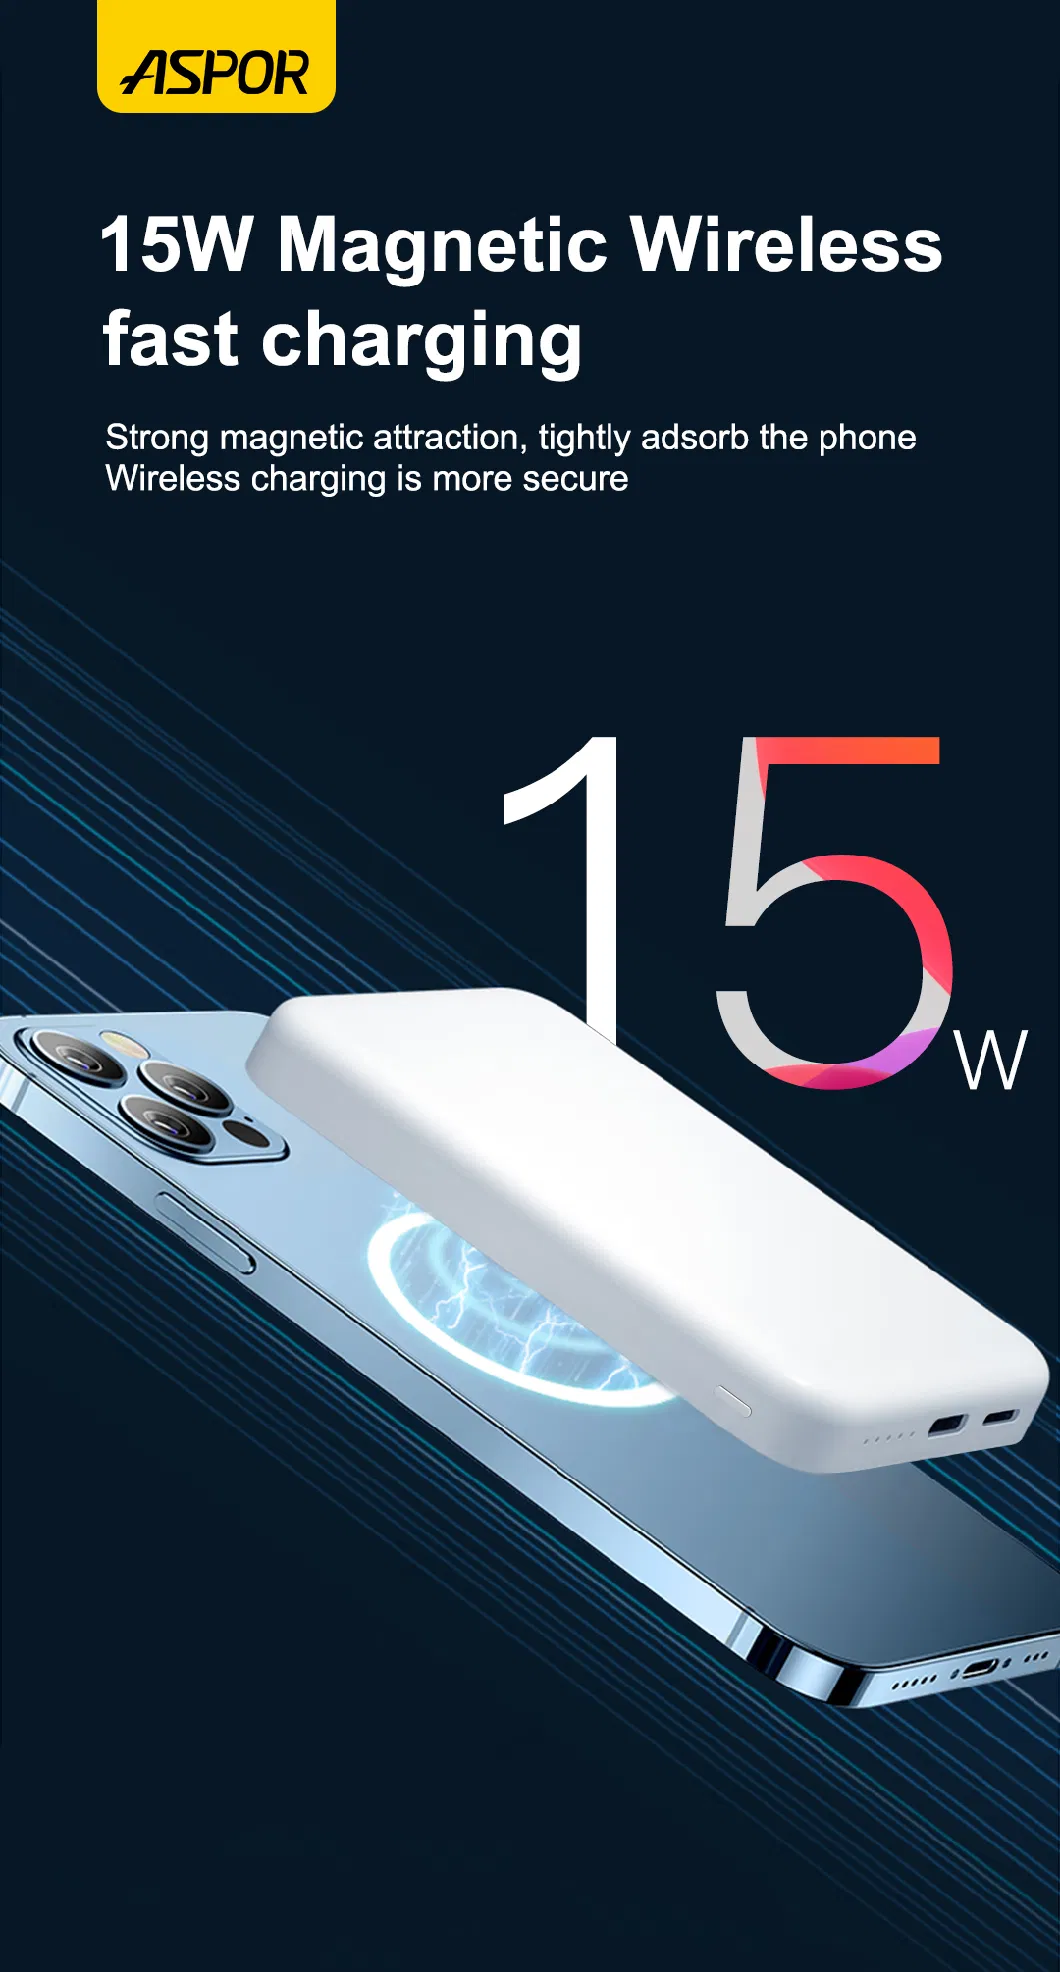 15W Magnetic Wireless Charging Power Bank Baby Small Size Power Bank